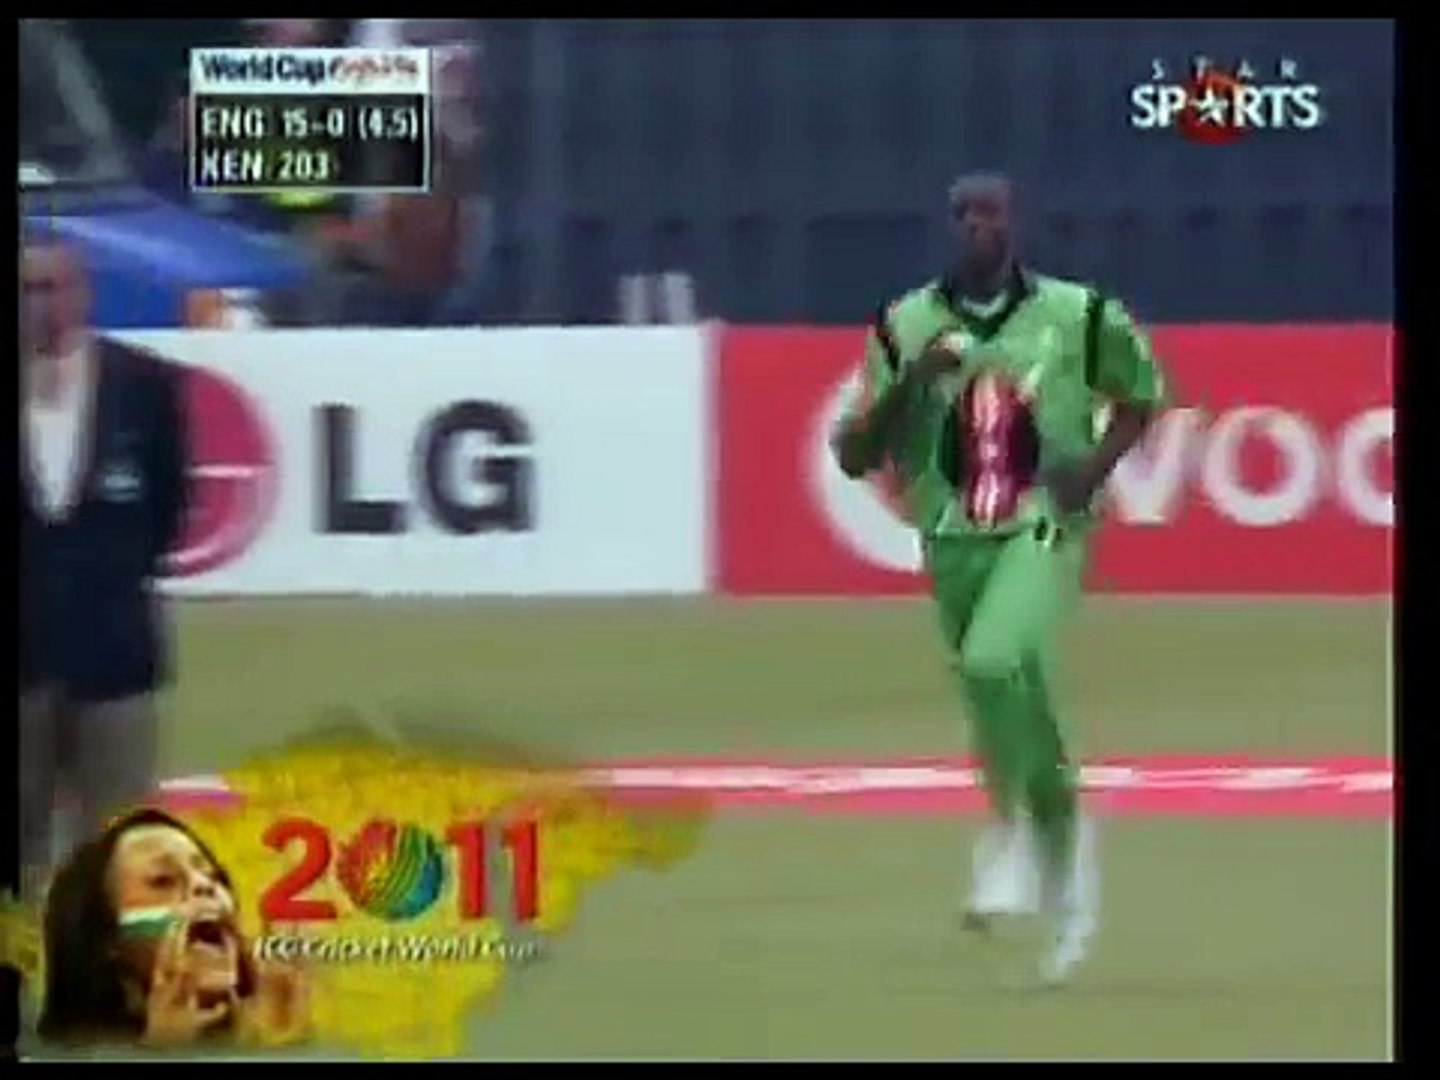 funny images of cricket world cup 2011